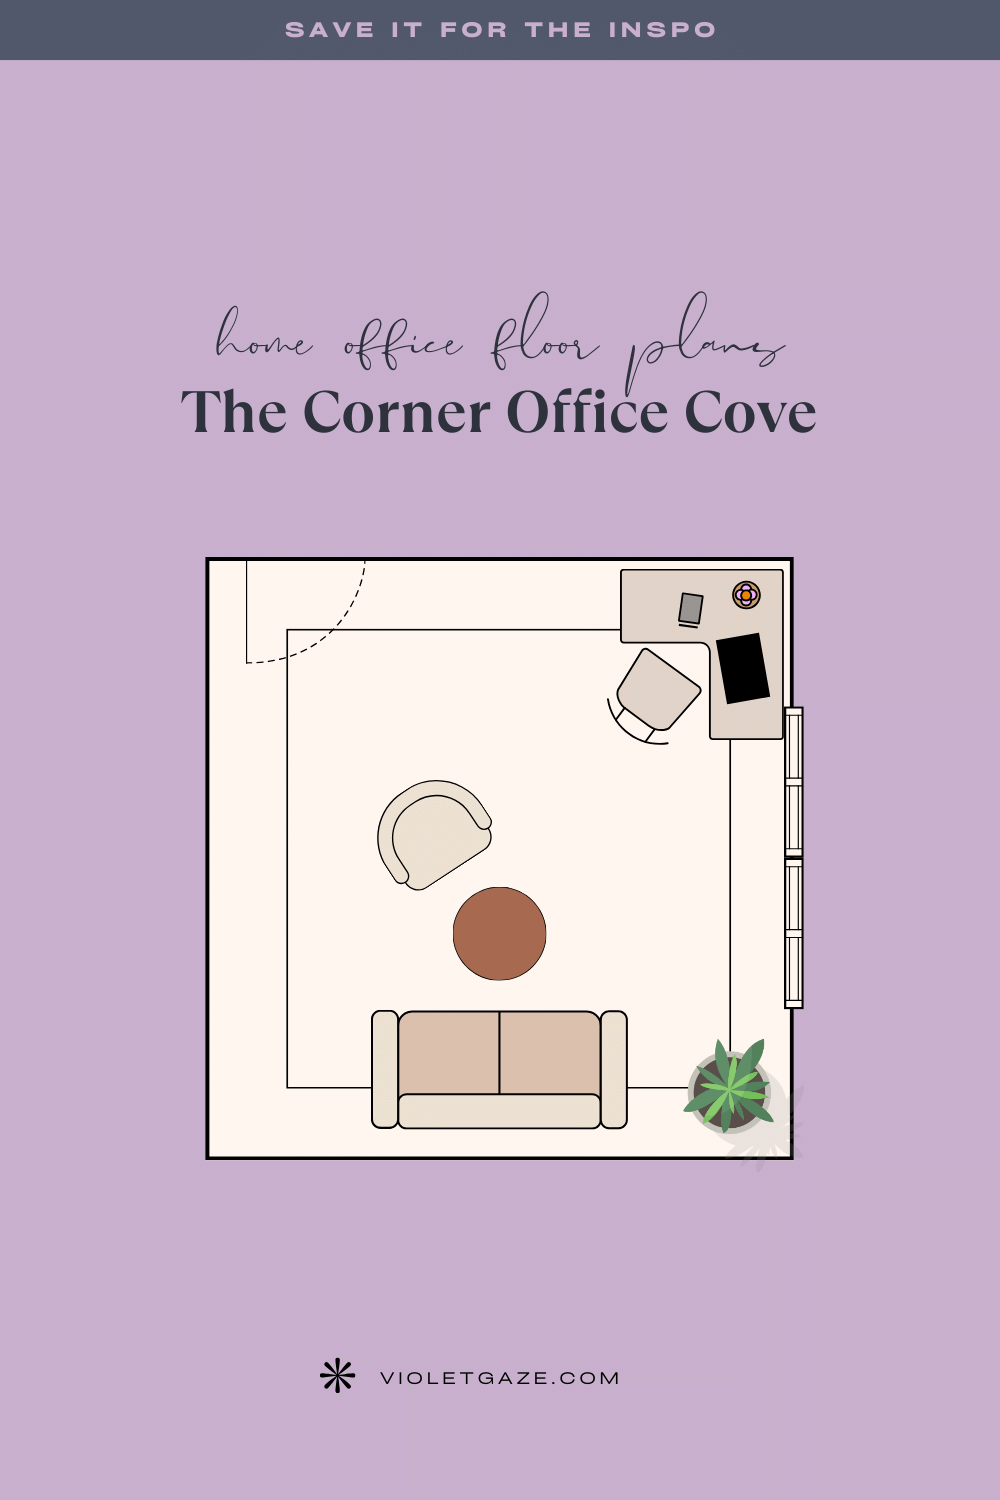 home office floor plans the corner office cove